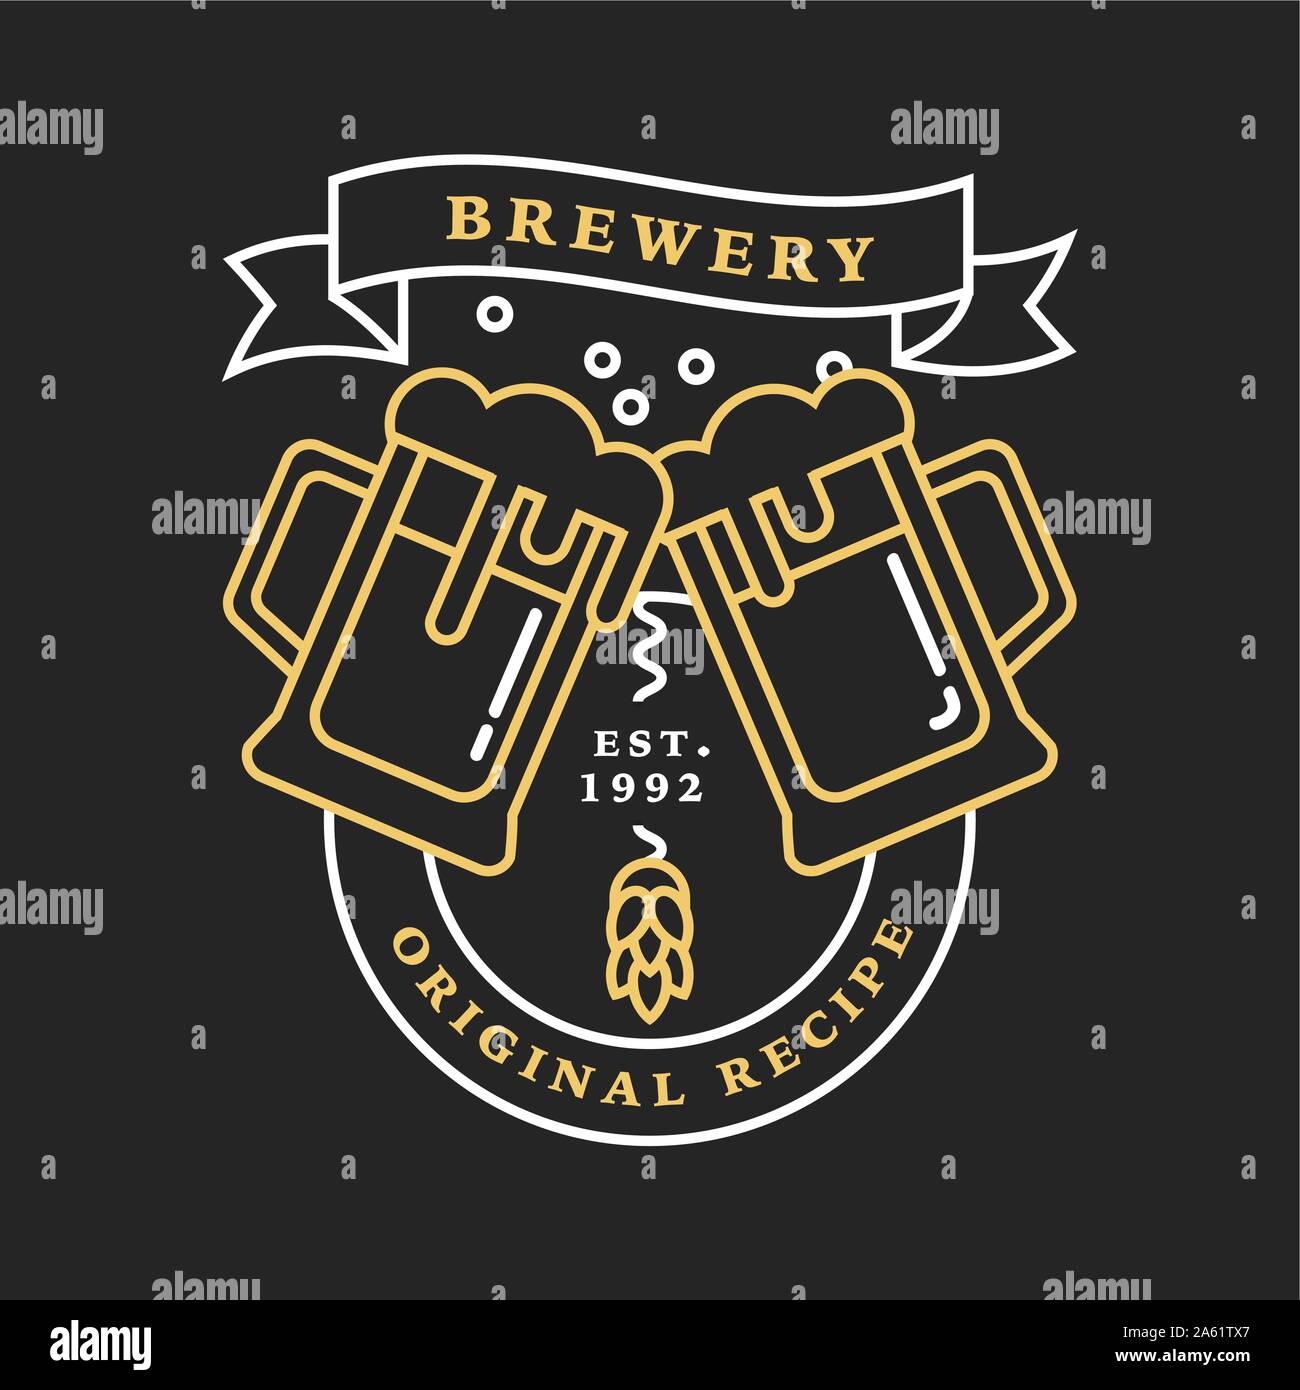 Linear golden brewery logos. Labels with glass of beer and hops. Vintage craft beer retro design elements, emblems, symbols, and icons or pub labels, Stock Vector